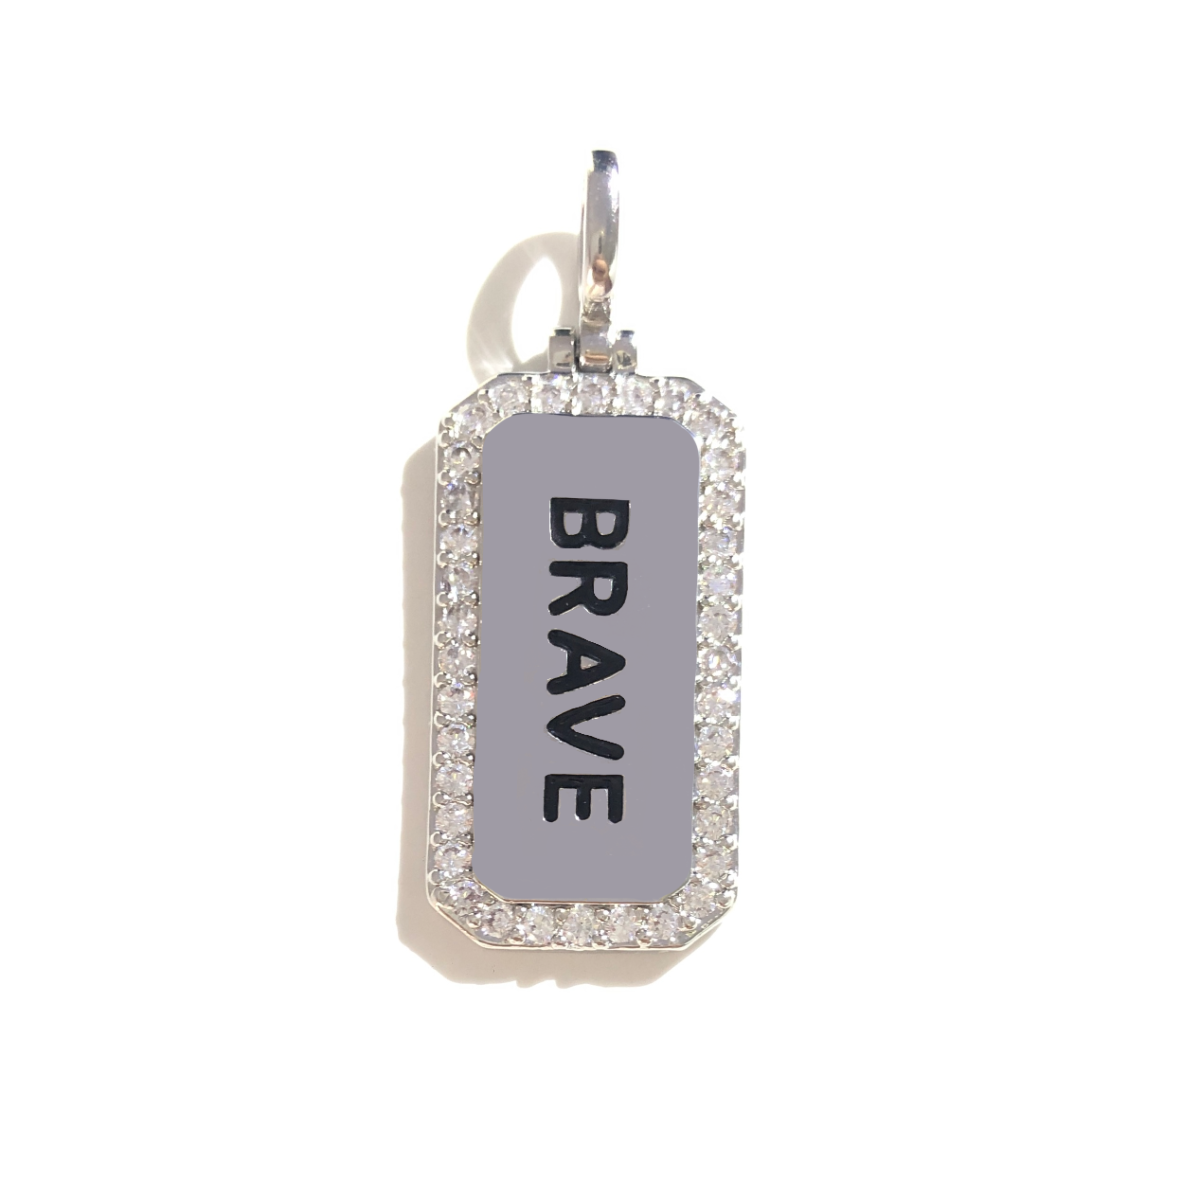 10pcs/lot 38*15mm CZ Paved Brave Word Tags Charms Pendants Silver CZ Paved Charms Christian Quotes New Charms Arrivals Word Tags Charms Beads Beyond